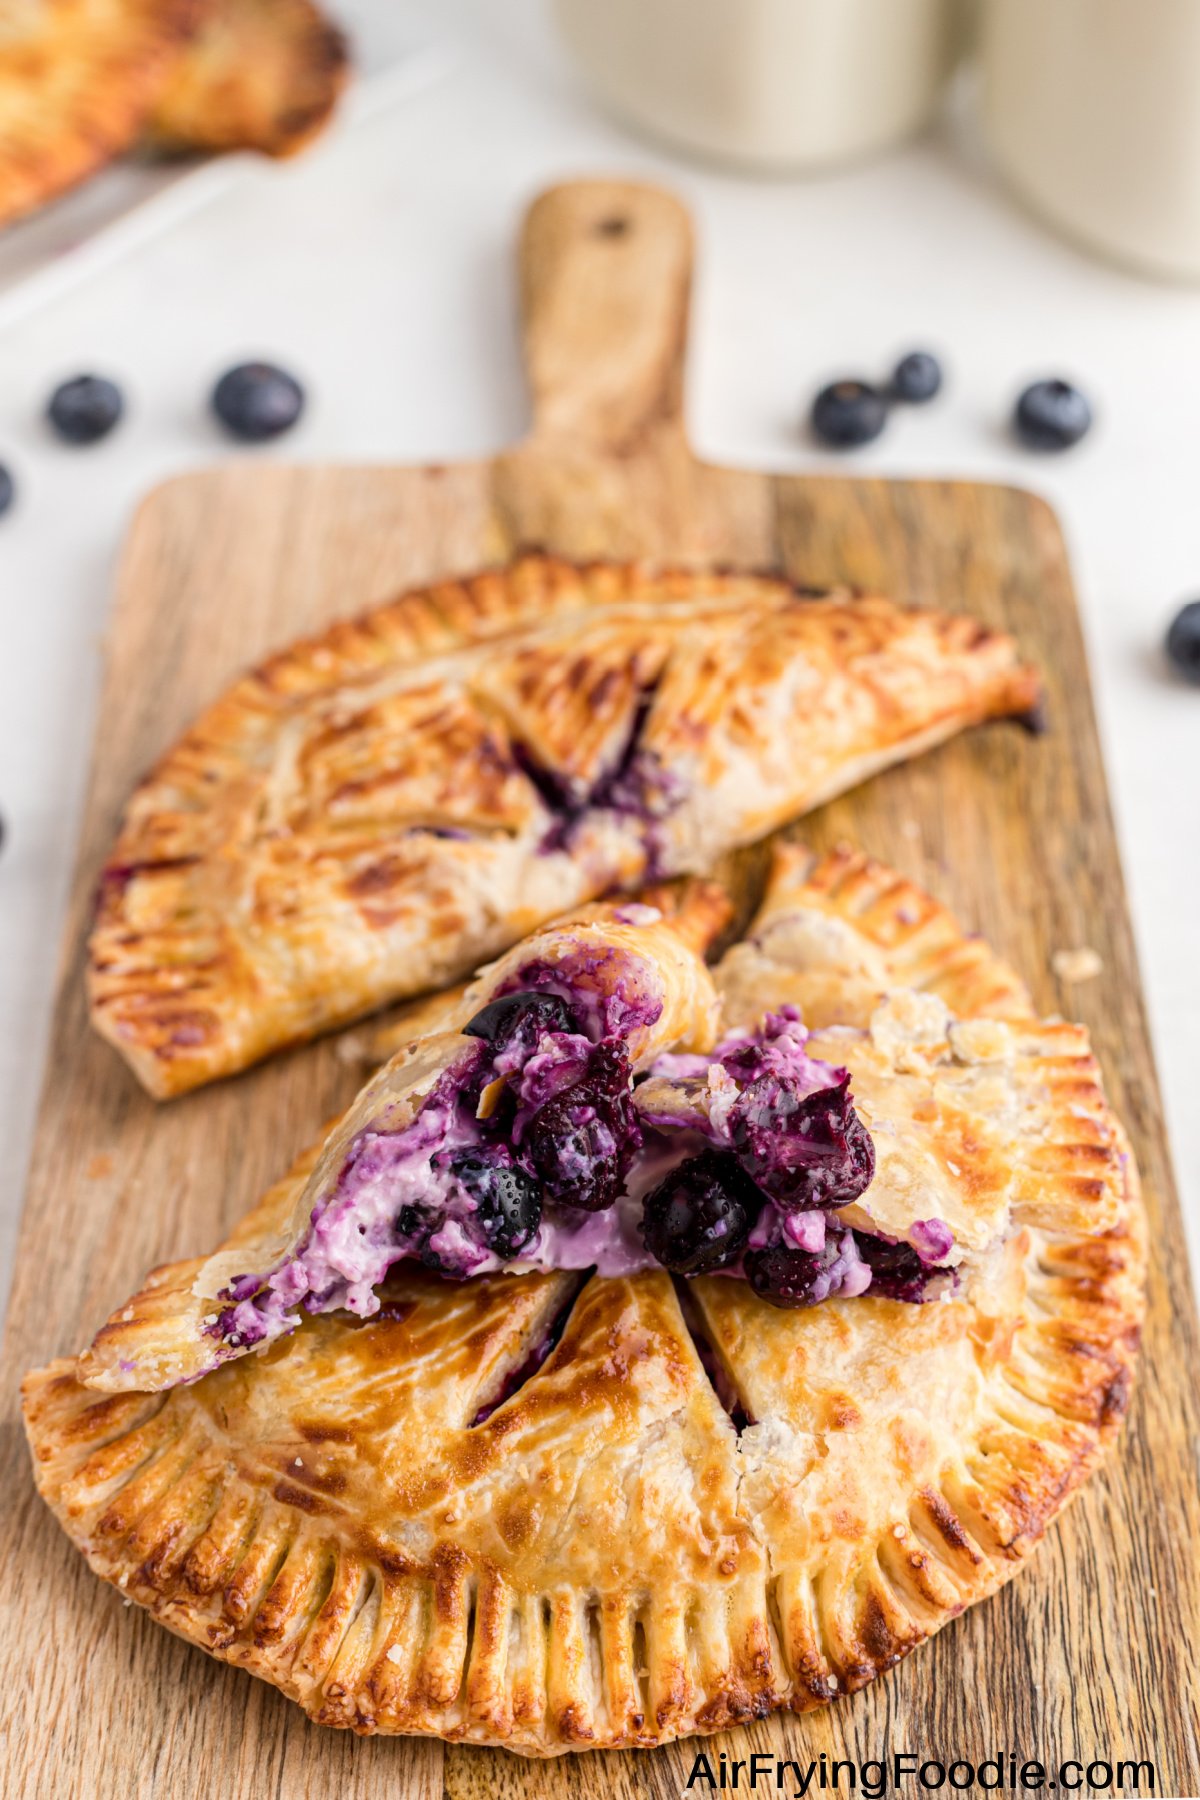 Blueberry hand pies made in an air fryer, and placed on a cutting board.